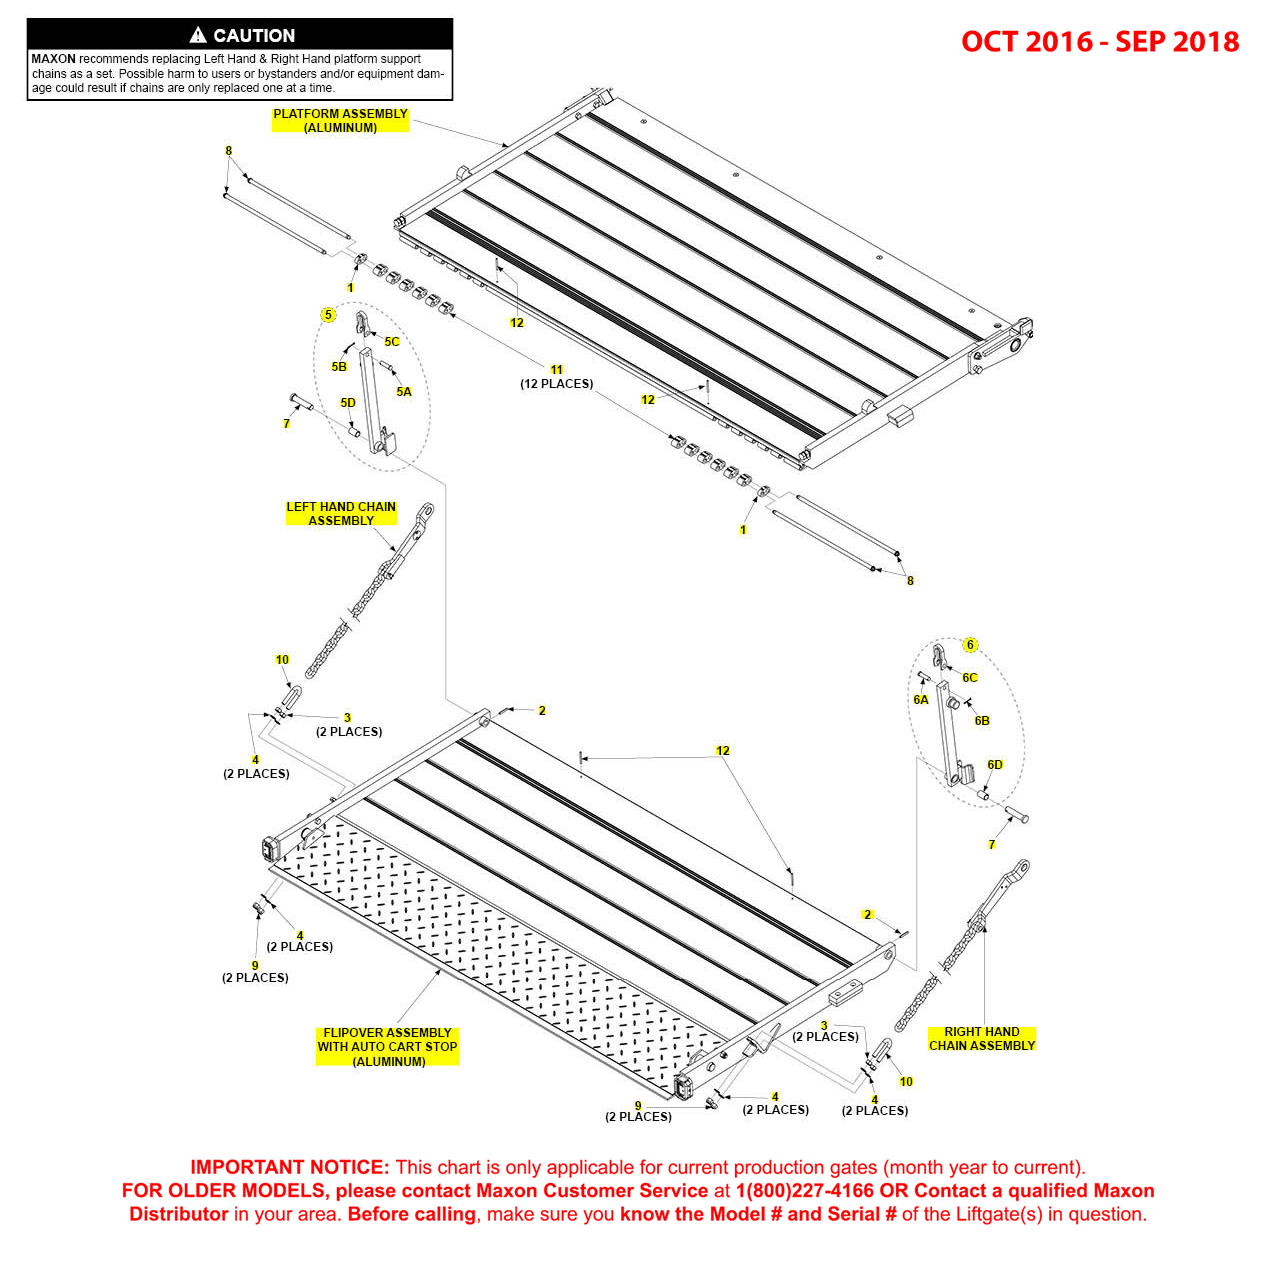 Maxon BMR (Oct 2016 - Sep 2018) Aluminum Platform Flipover And Chain Assembly With Auto Cart Stop Diagram